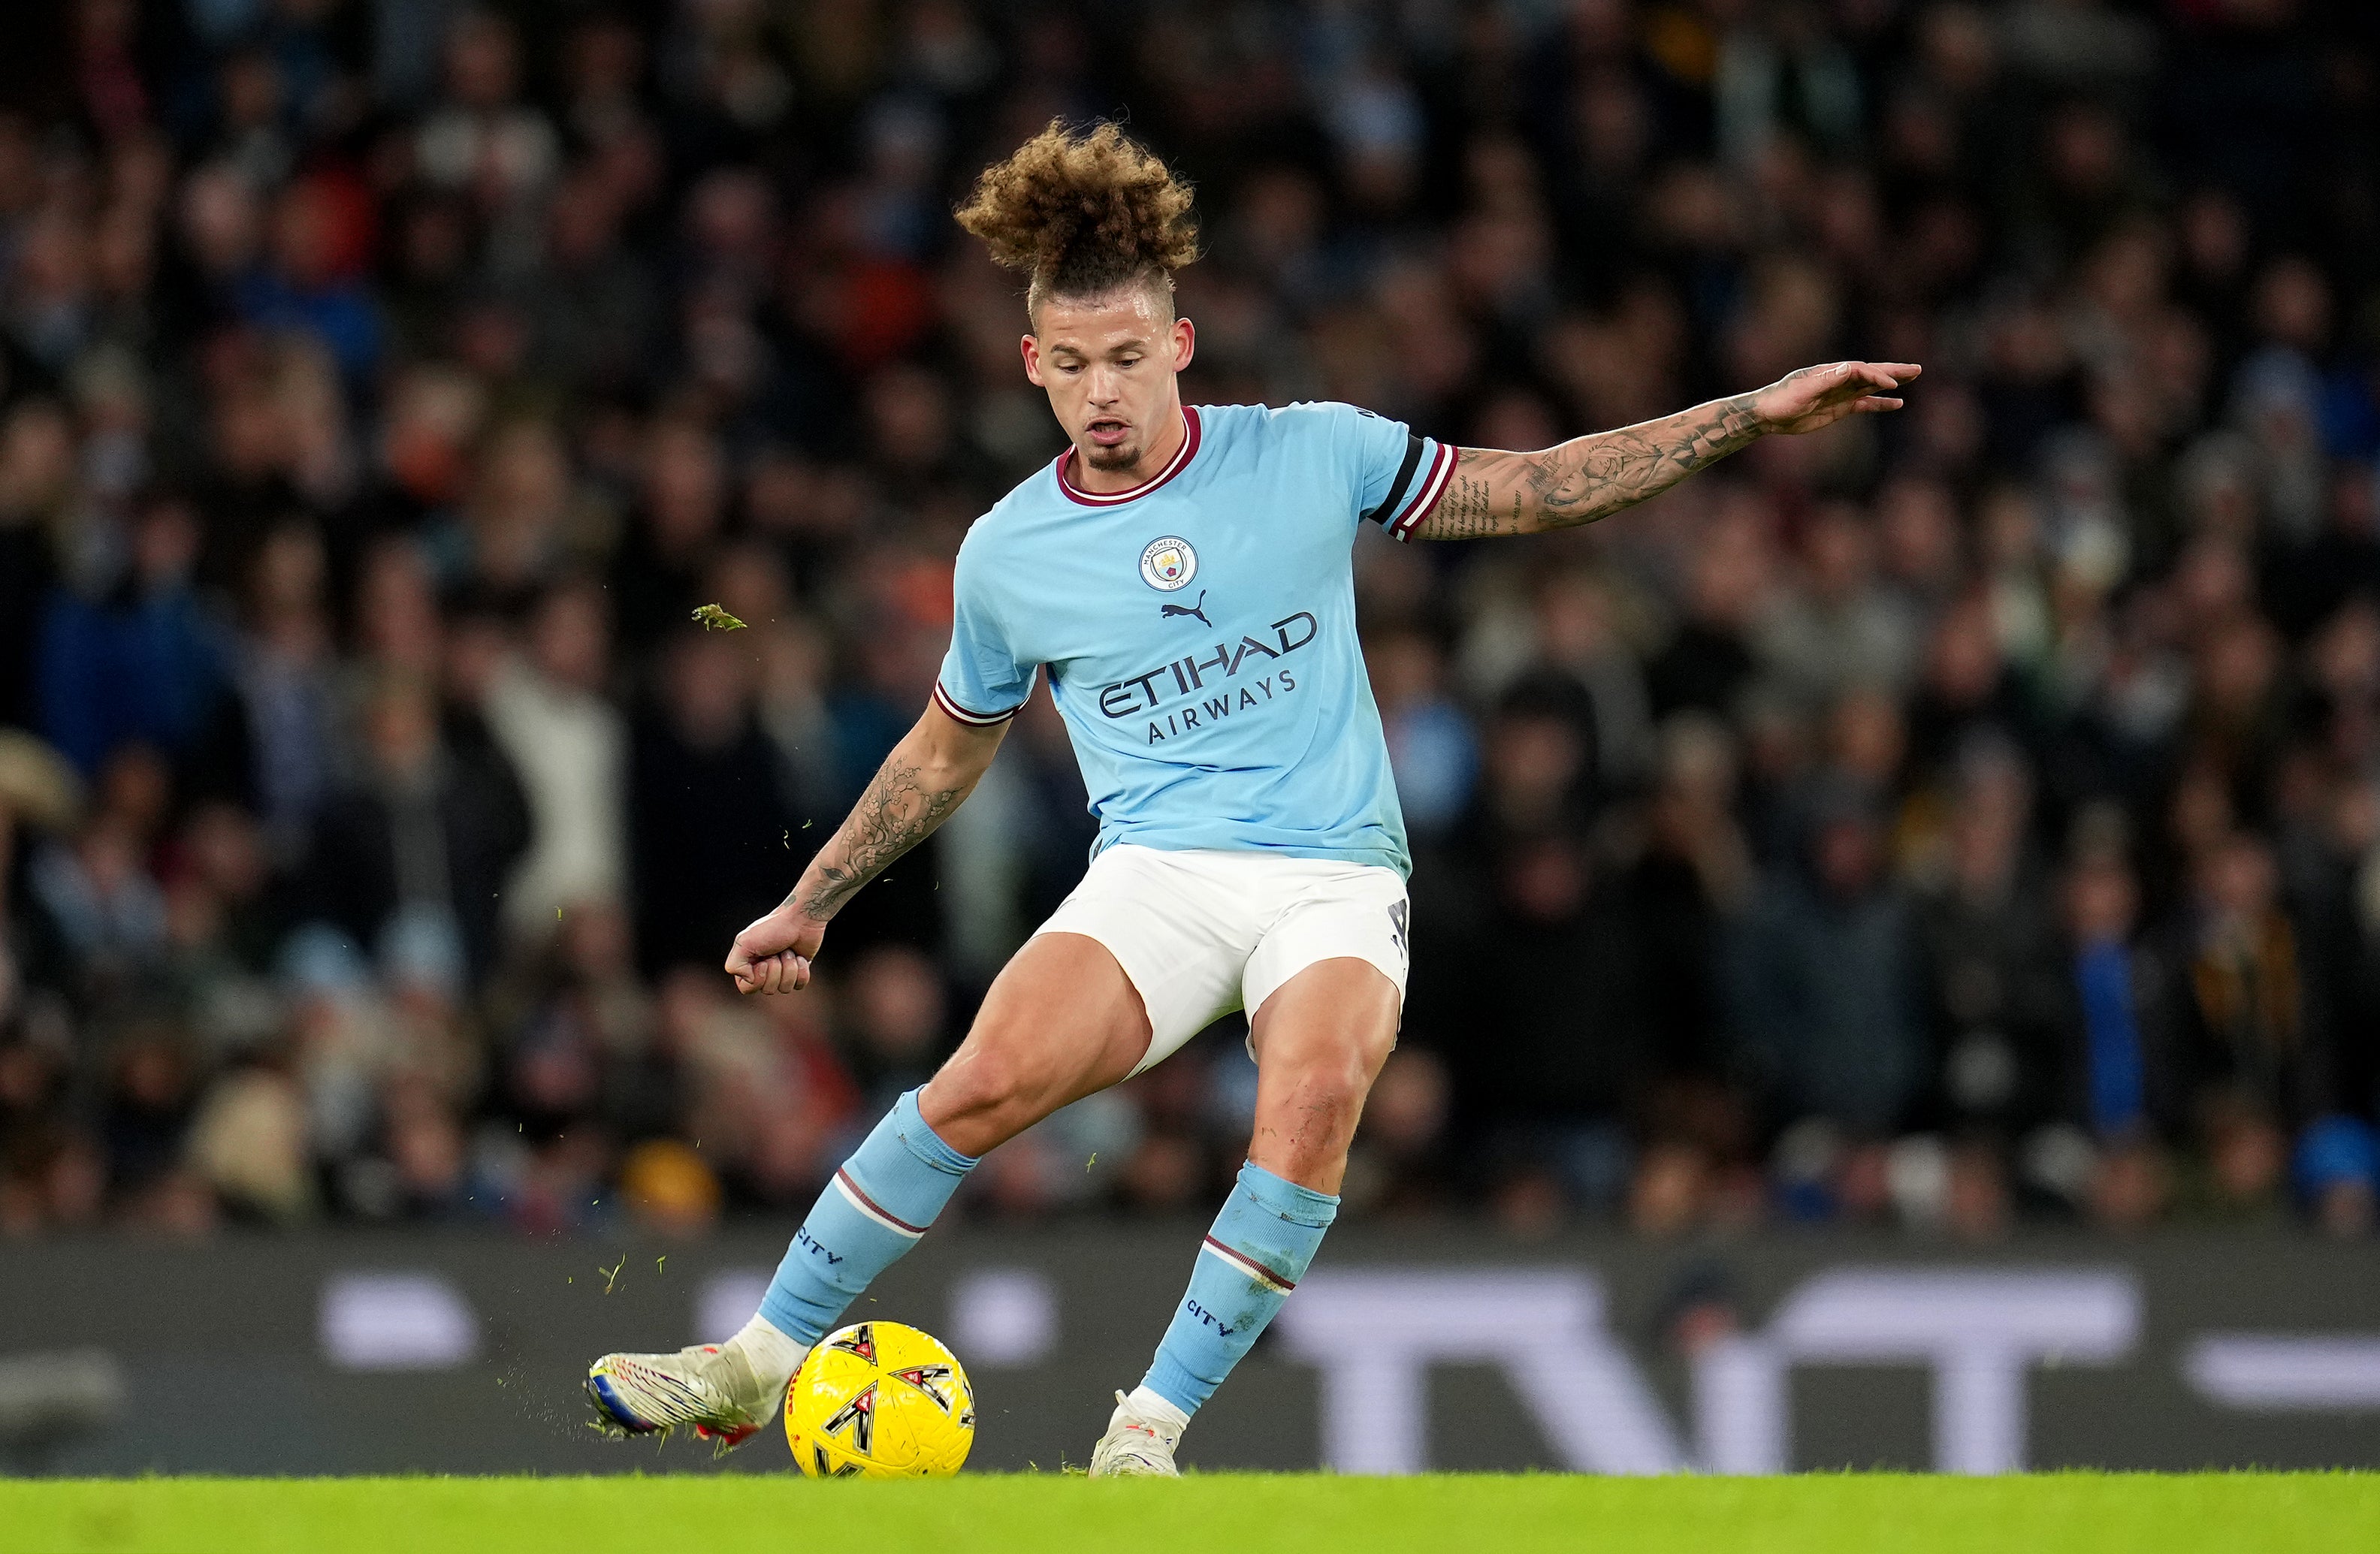 Kalvin Phillips is yet to start for Manchester City since joining from Leeds in the summer